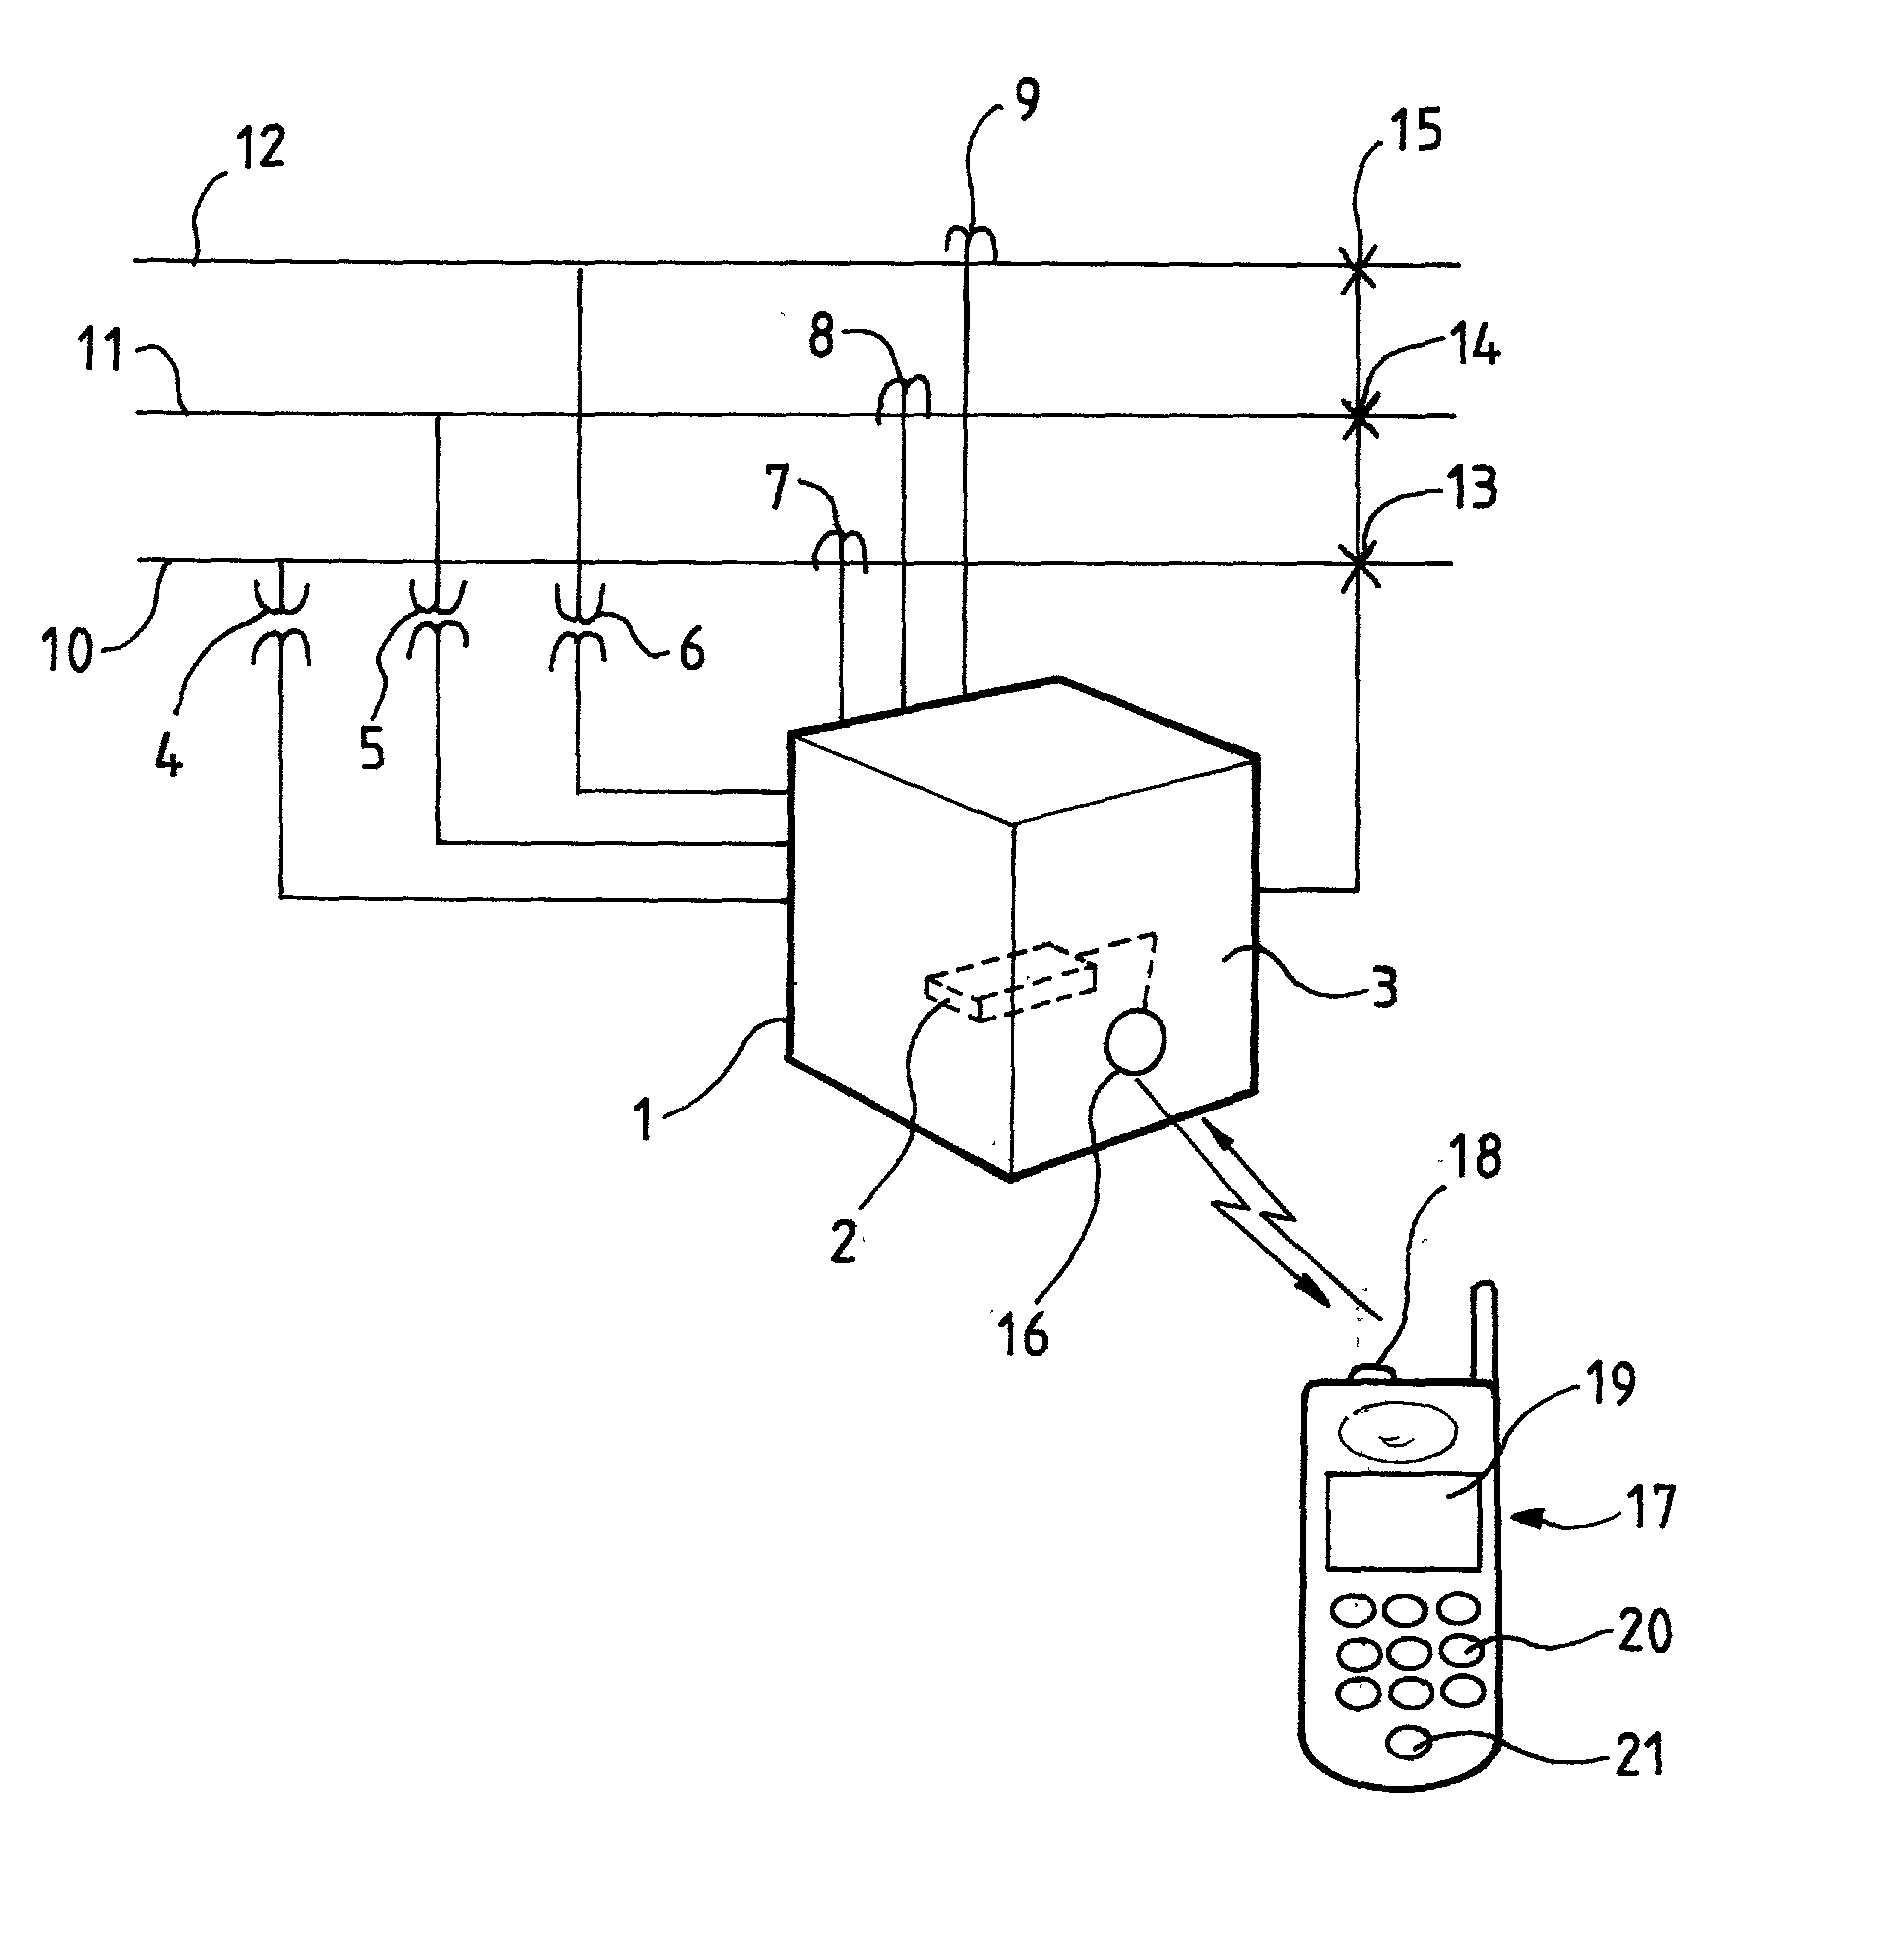 Protection system for an electricity network having a "Bluetooth" data transmission radio link